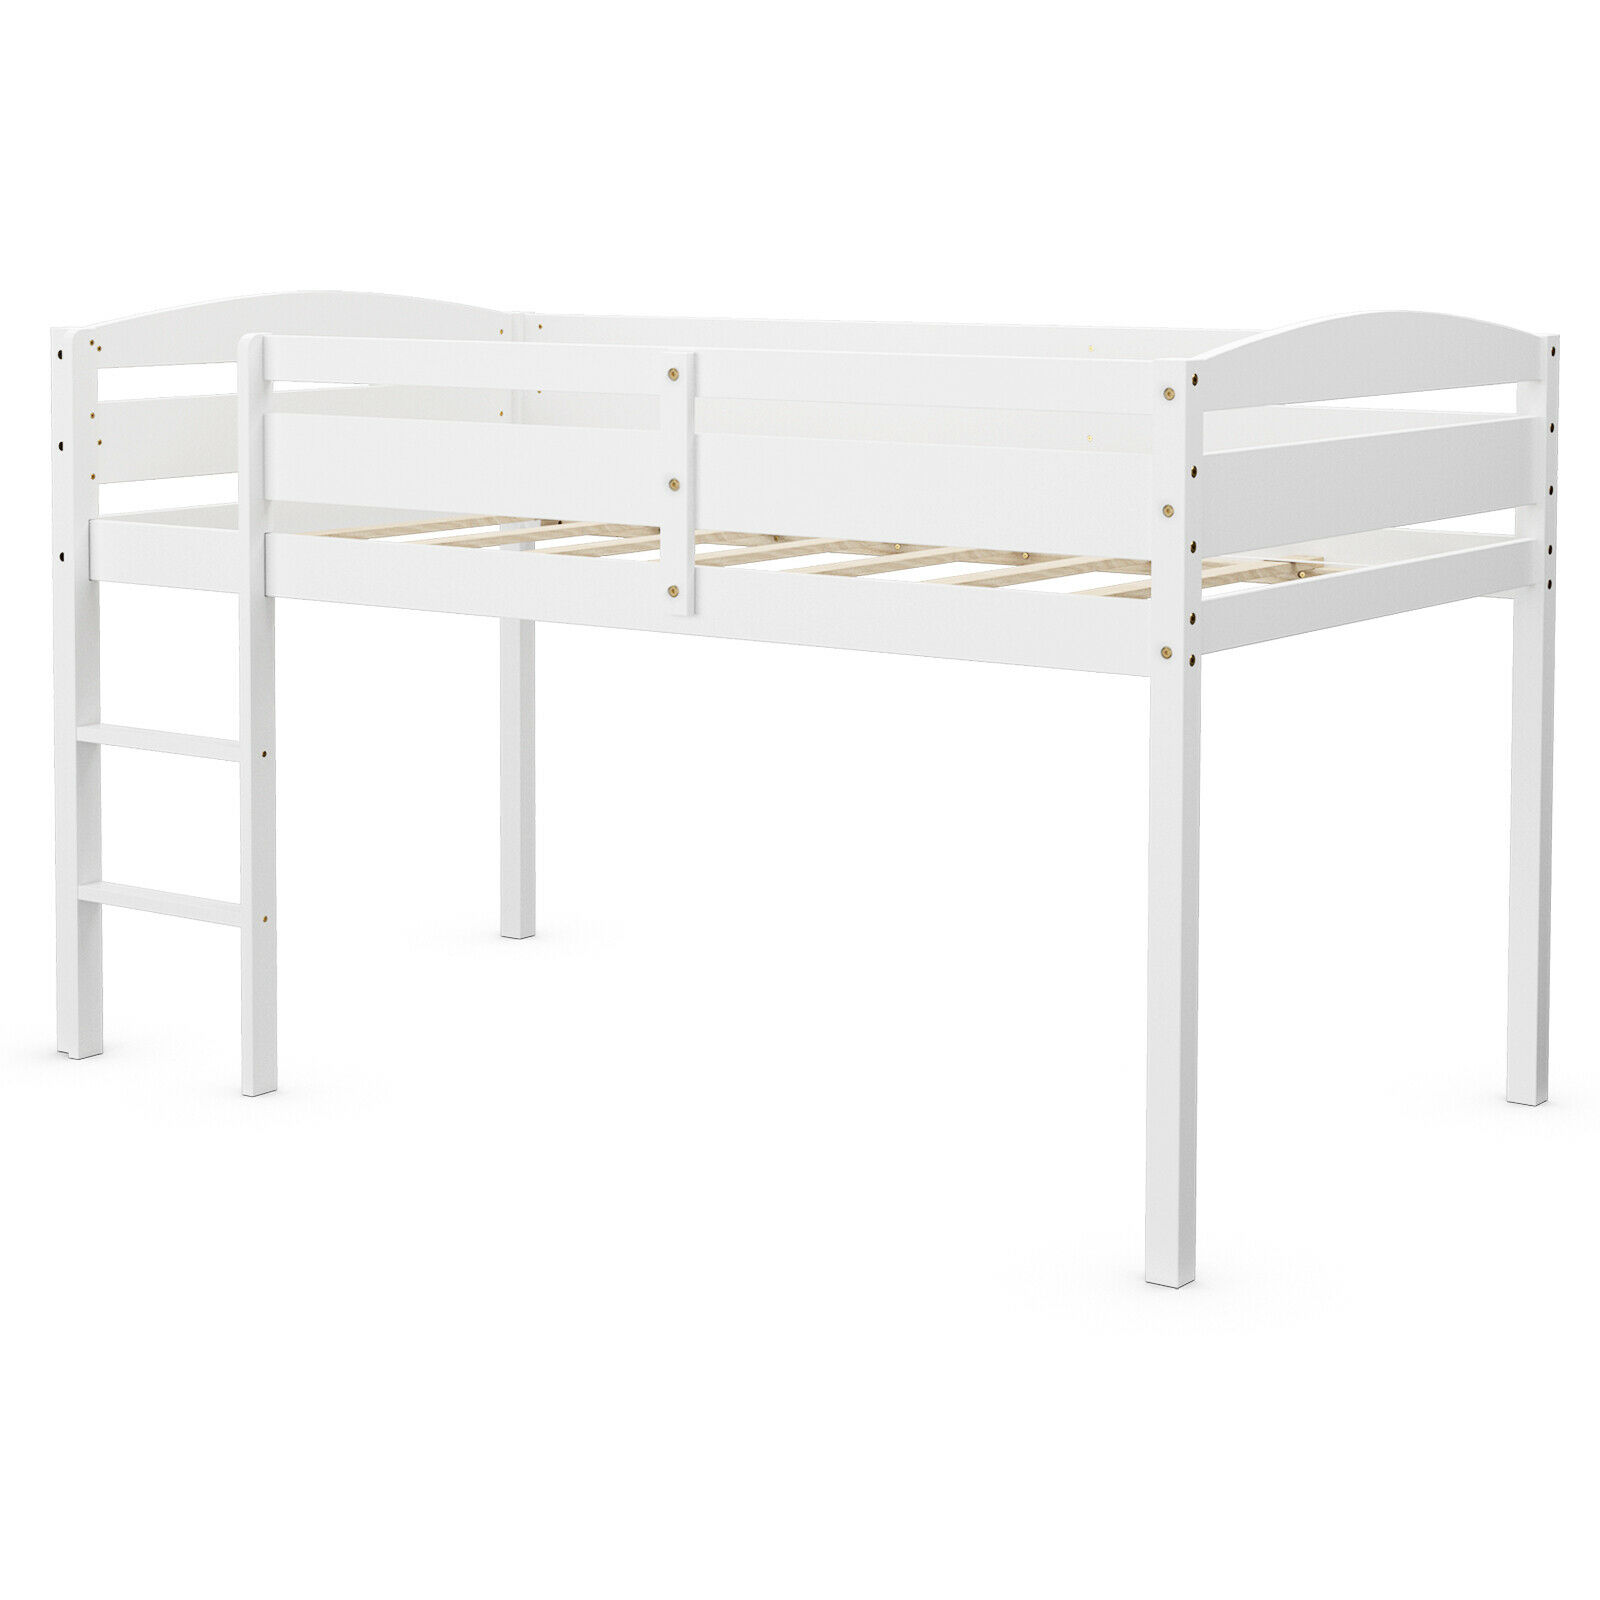 Giantex Twin Low Loft Bunk Junior Bed, Wooden Guard Rail For Twin Bed